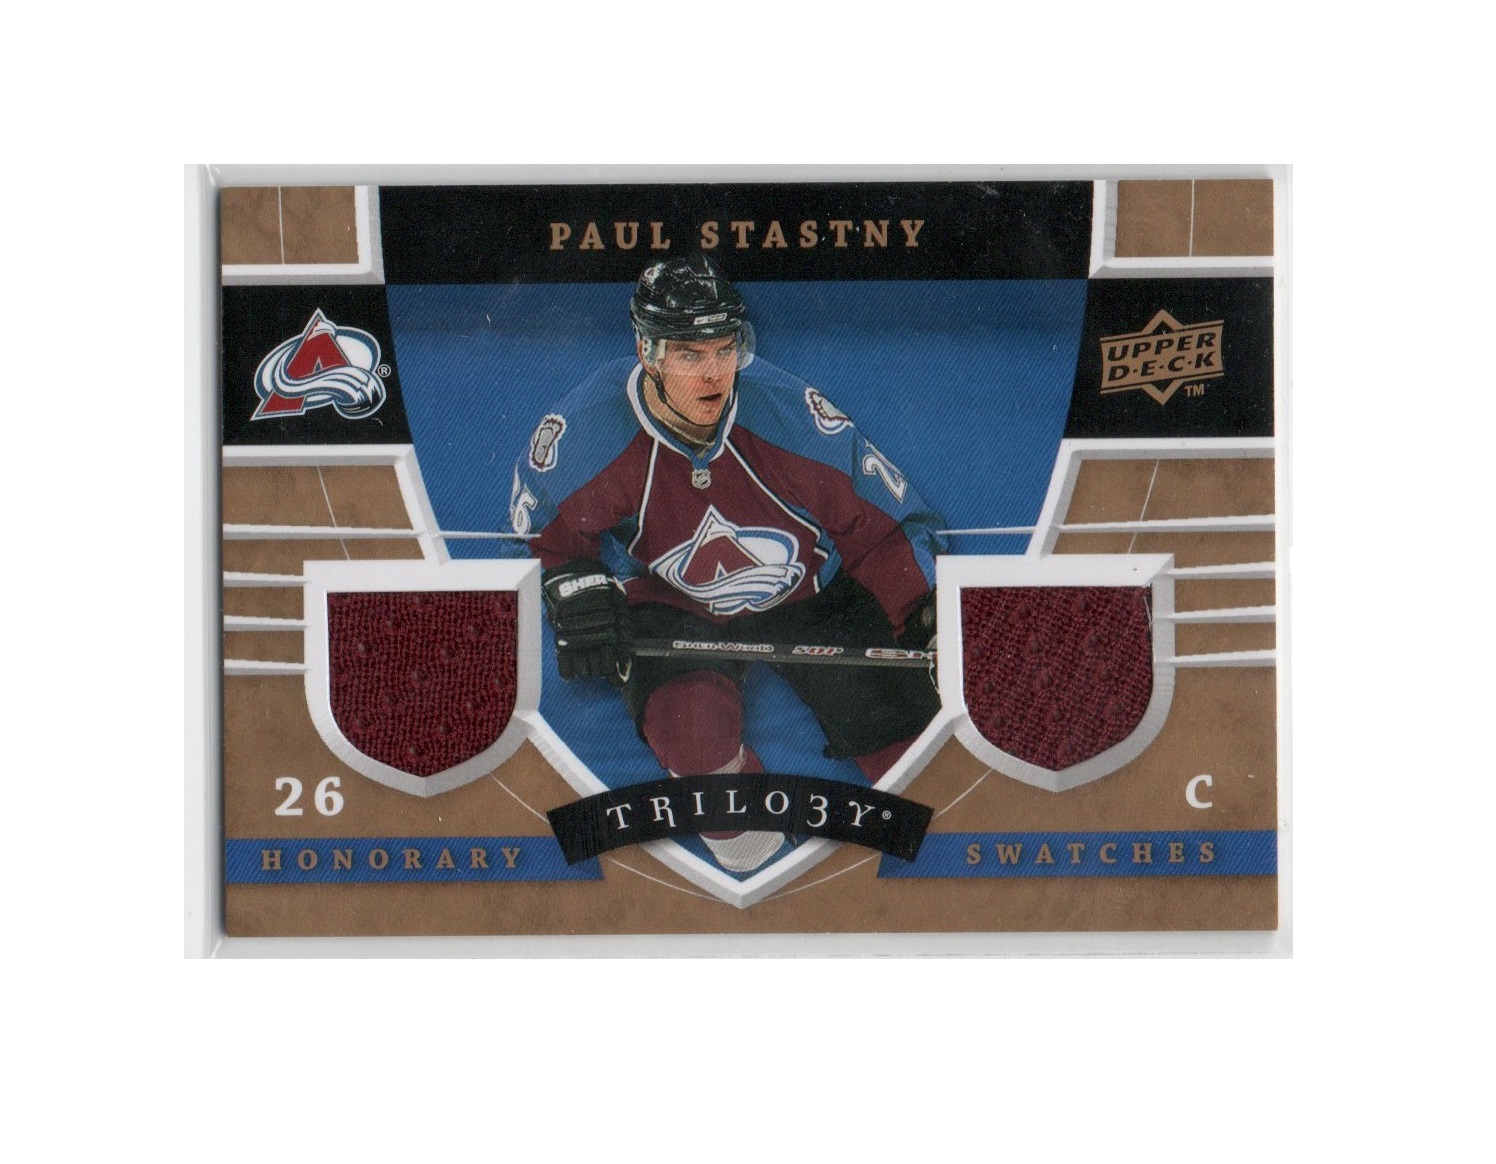 2008-09 Upper Deck Trilogy Honorary Swatches #HSPS Paul Stastny (30-X234-GAMEUSED-AVALANCHE)